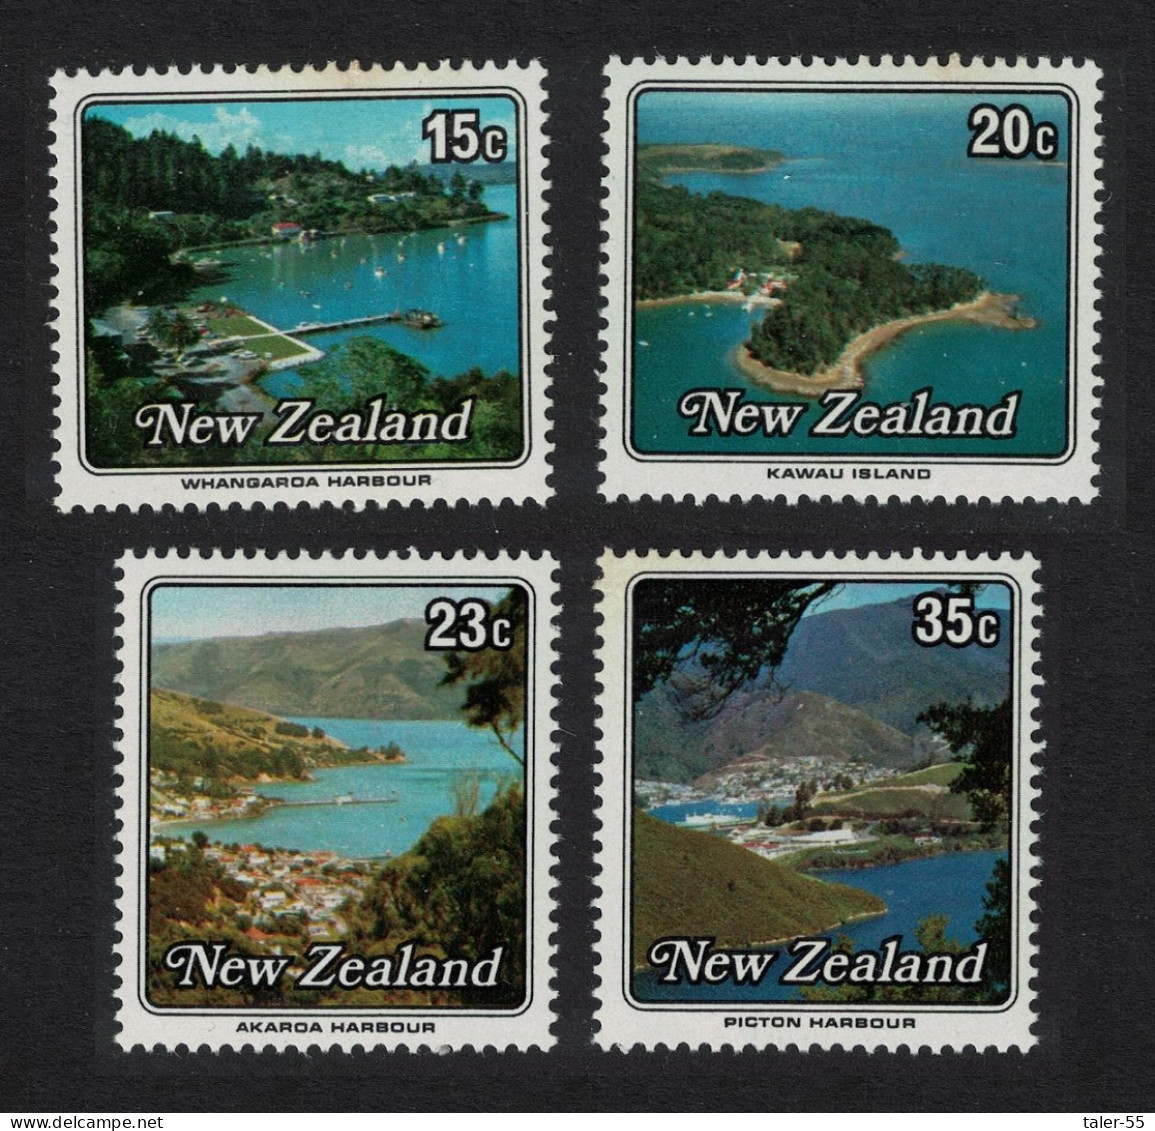 New Zealand Small Harbours 4v 1979 MNH SG#1192-1195 - Unused Stamps